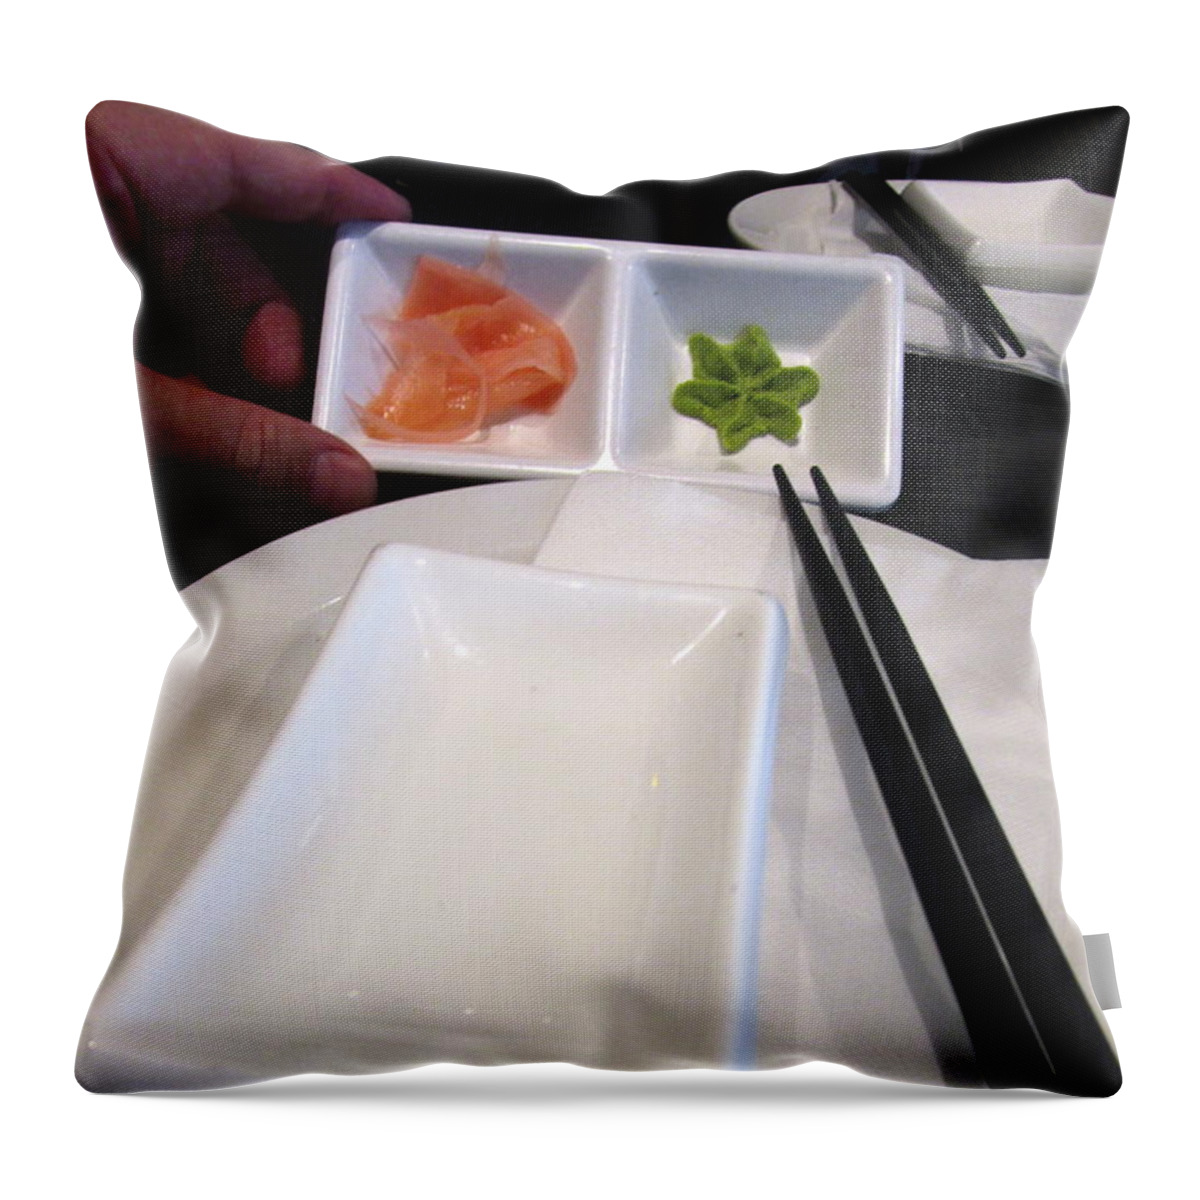 Wasabi Throw Pillow featuring the photograph Wasabi And Ginger by Randall Weidner